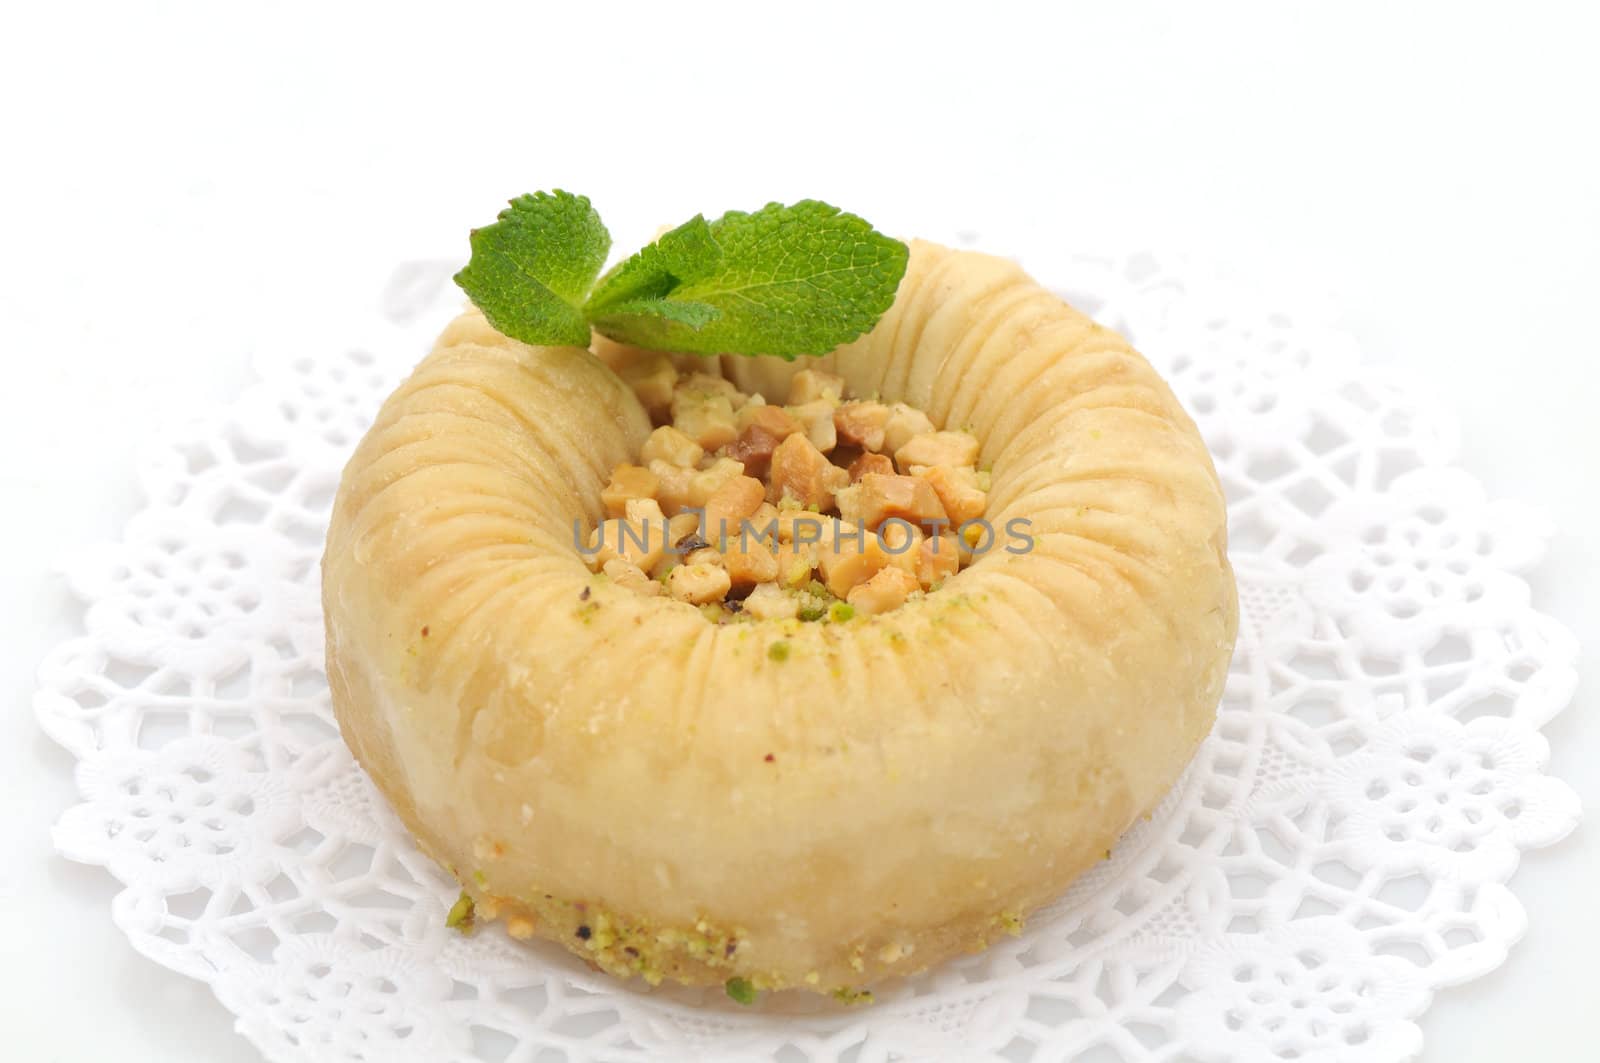 Fresh round baklava on a white paper doily, decorated with mint leaves